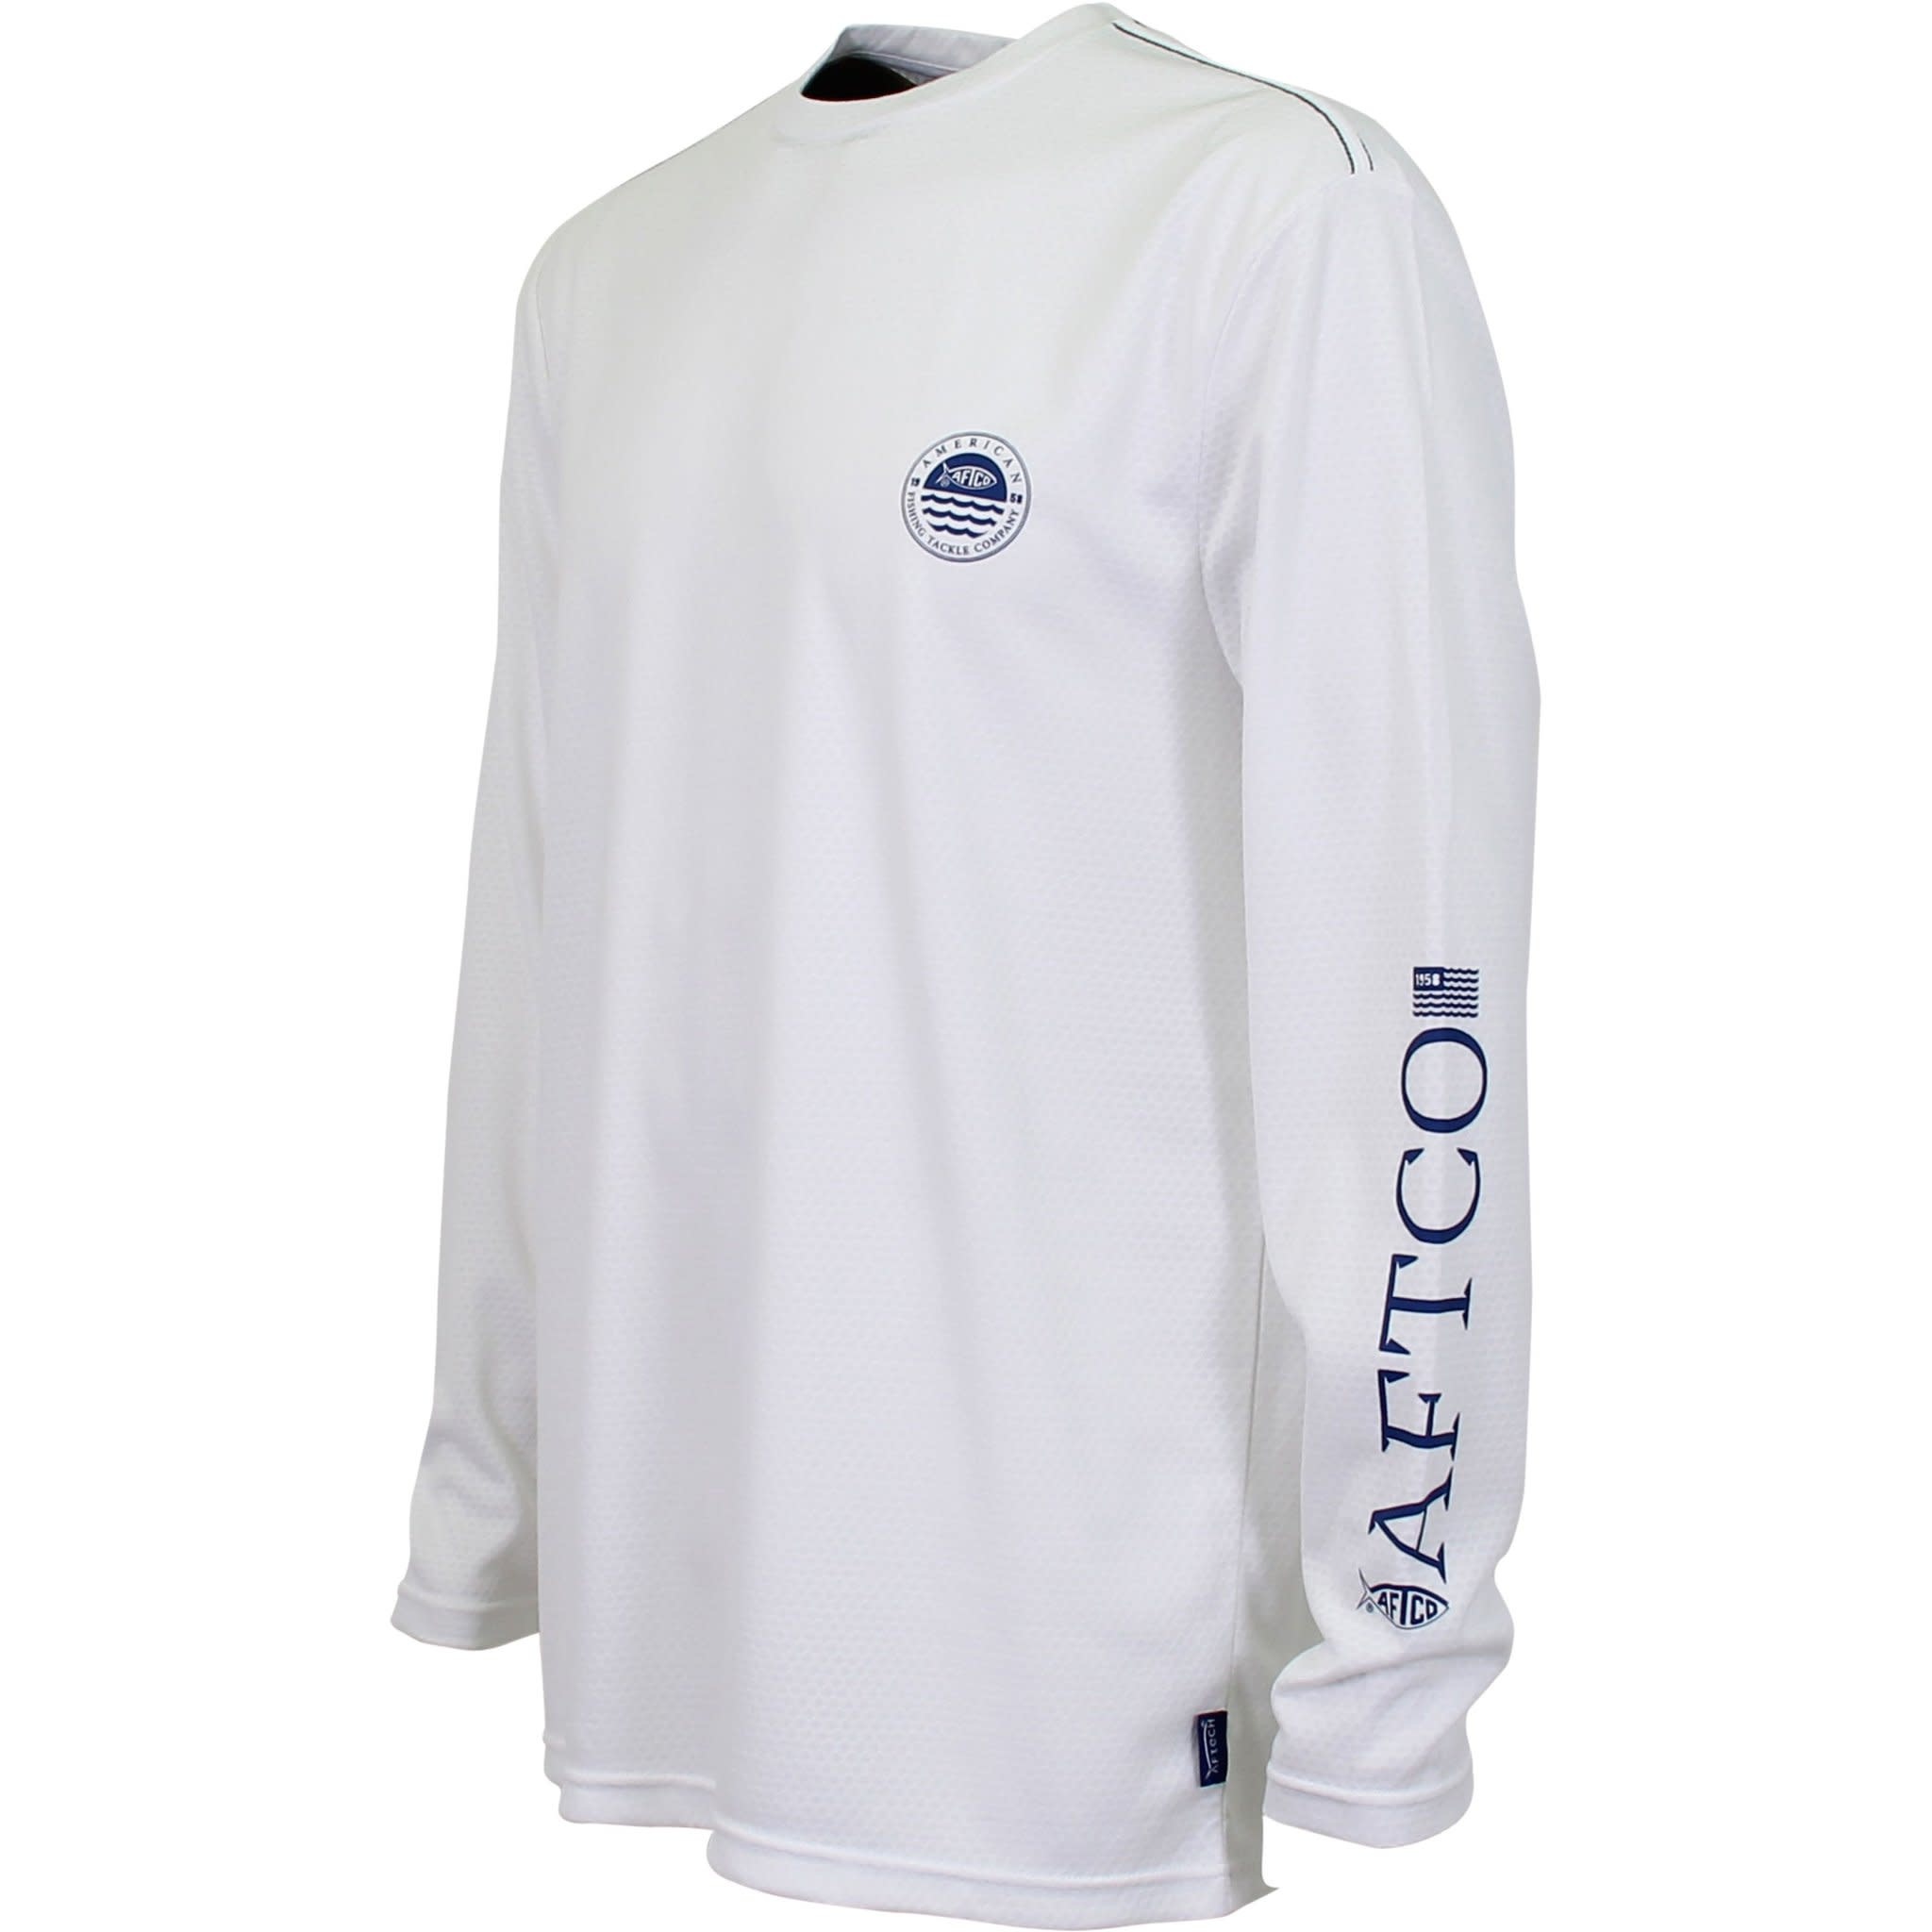 AFTCO AFTCO Frontline Air O Dobby Performance LS Shirt